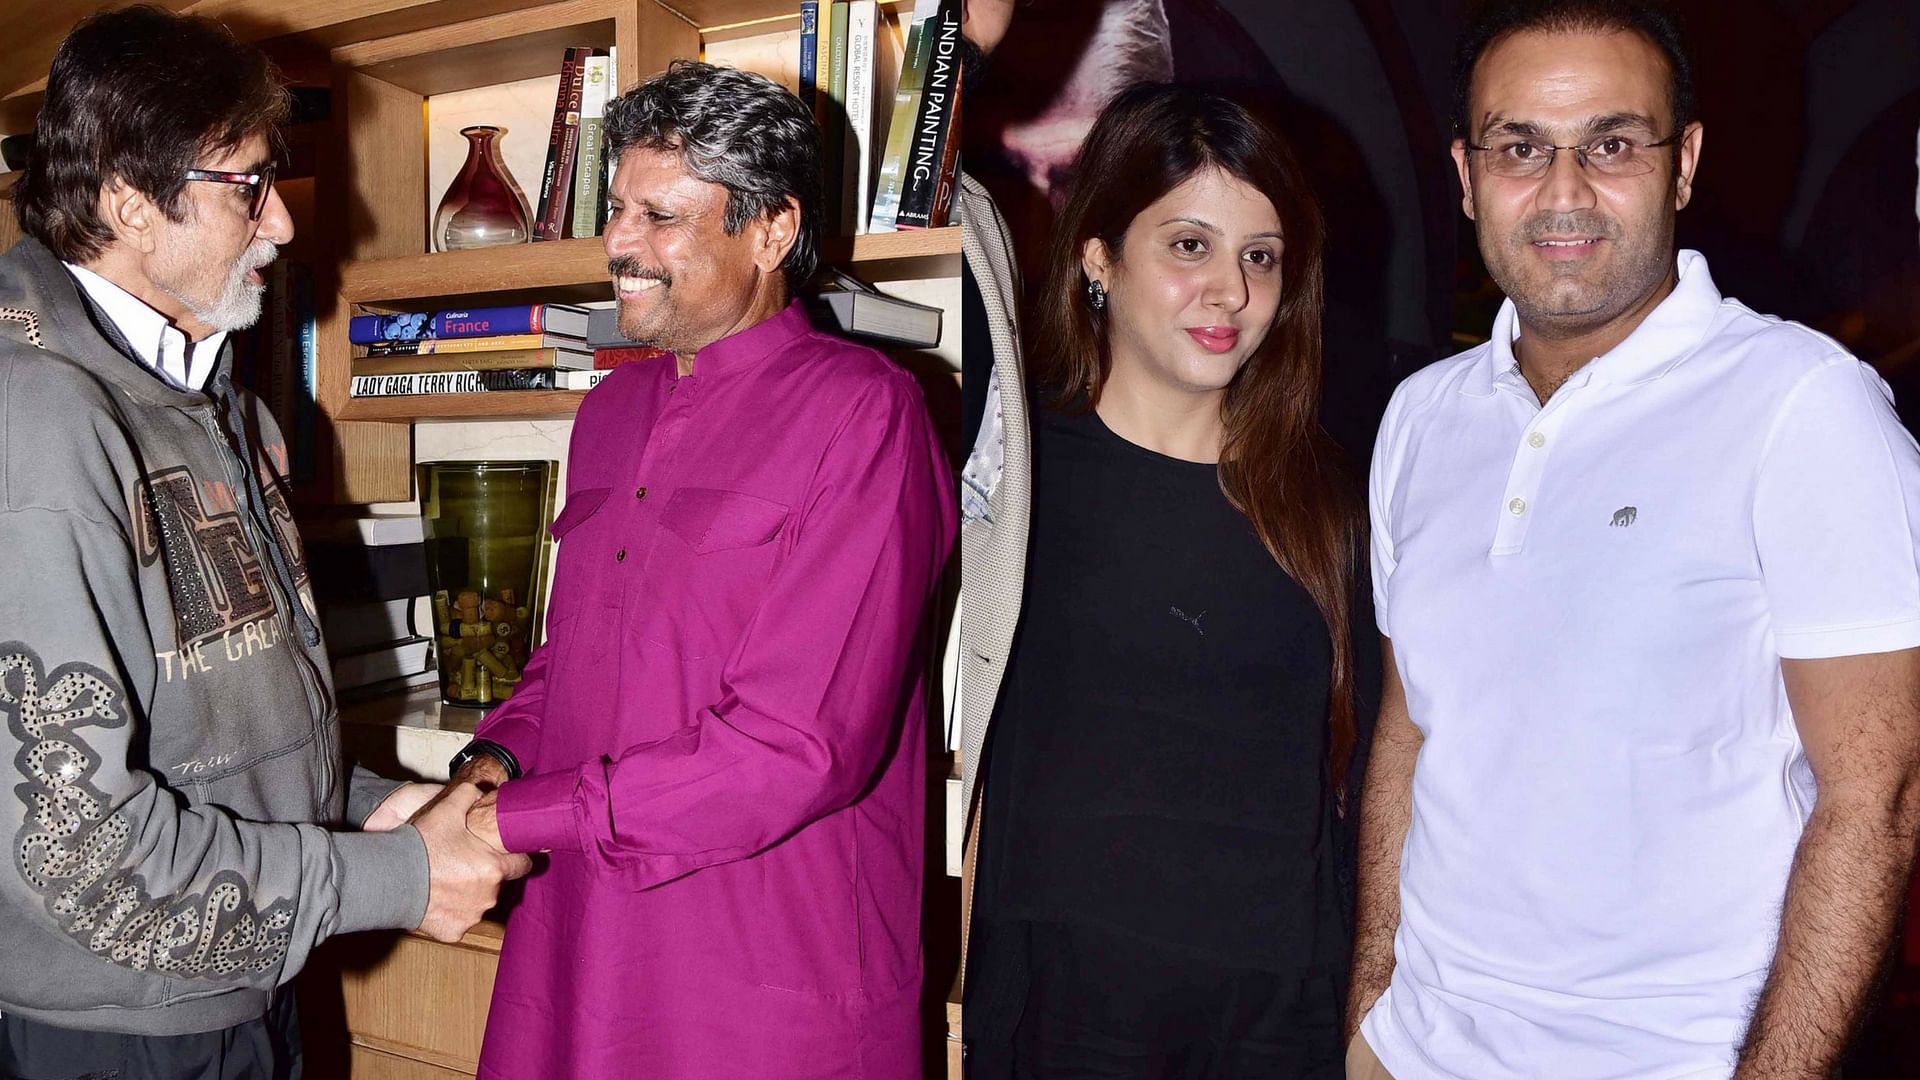 Amitabh Bachchan with Kapil Dev and cricketer Virender Sehwag with wife Aarti at the party. (Photo: Yogen Shah)